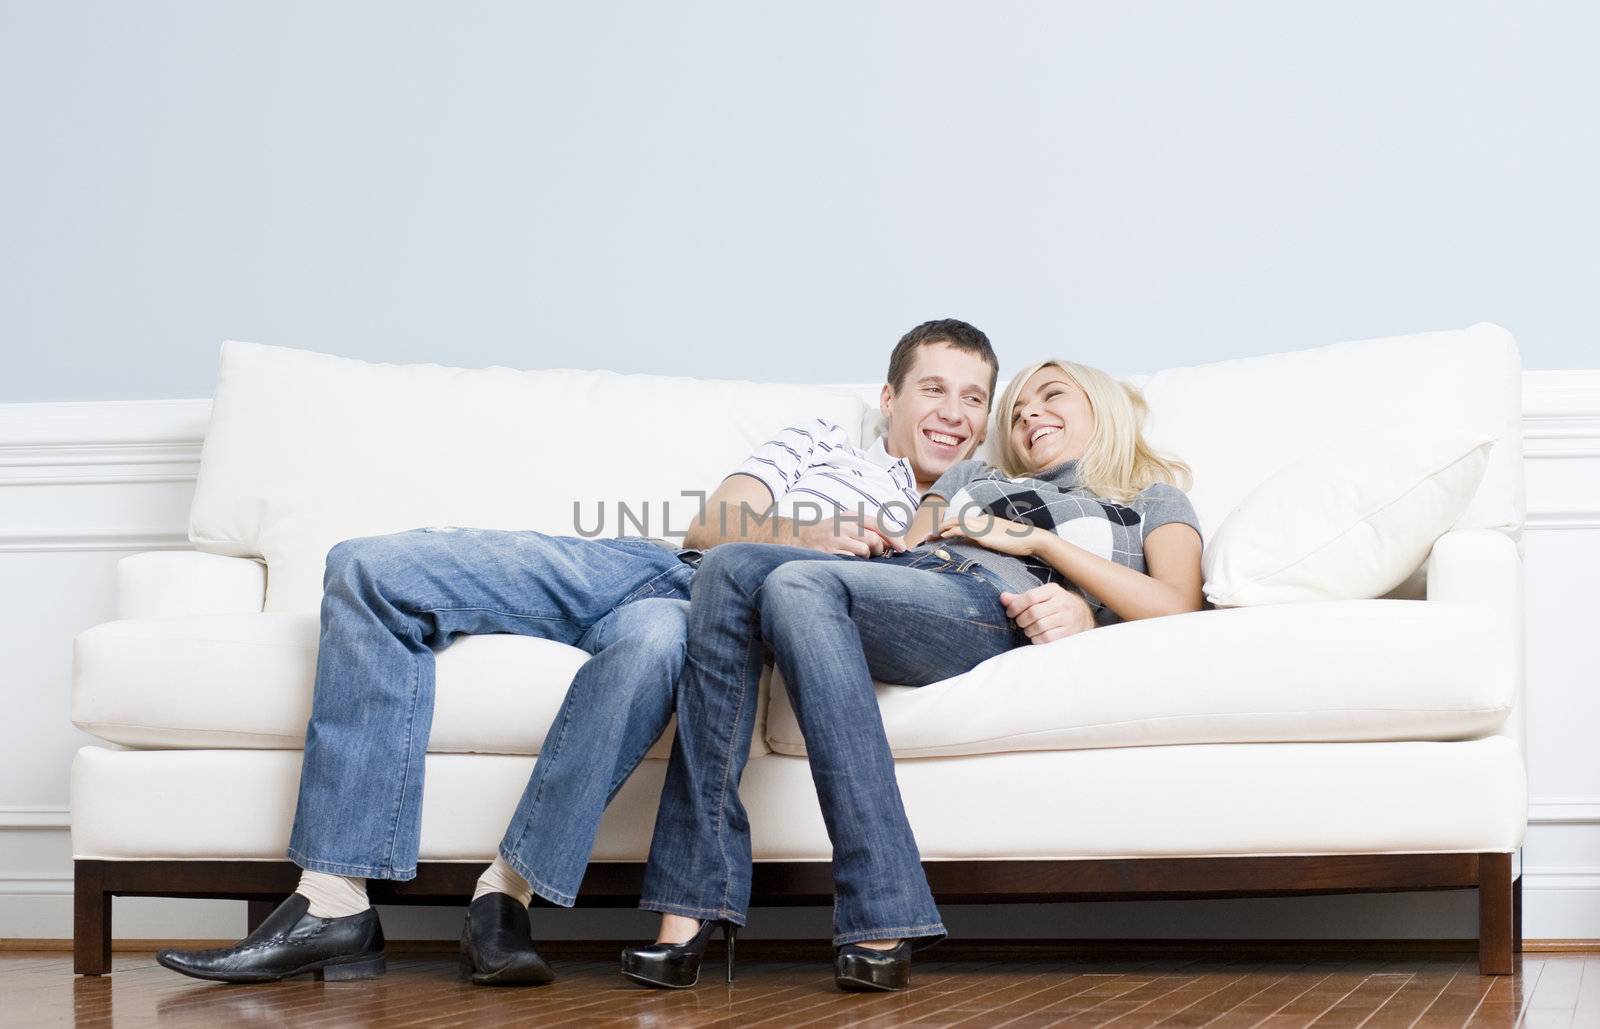 Full length view of affectionate couple laughing and relaxing together on white couch. Horizontal format.